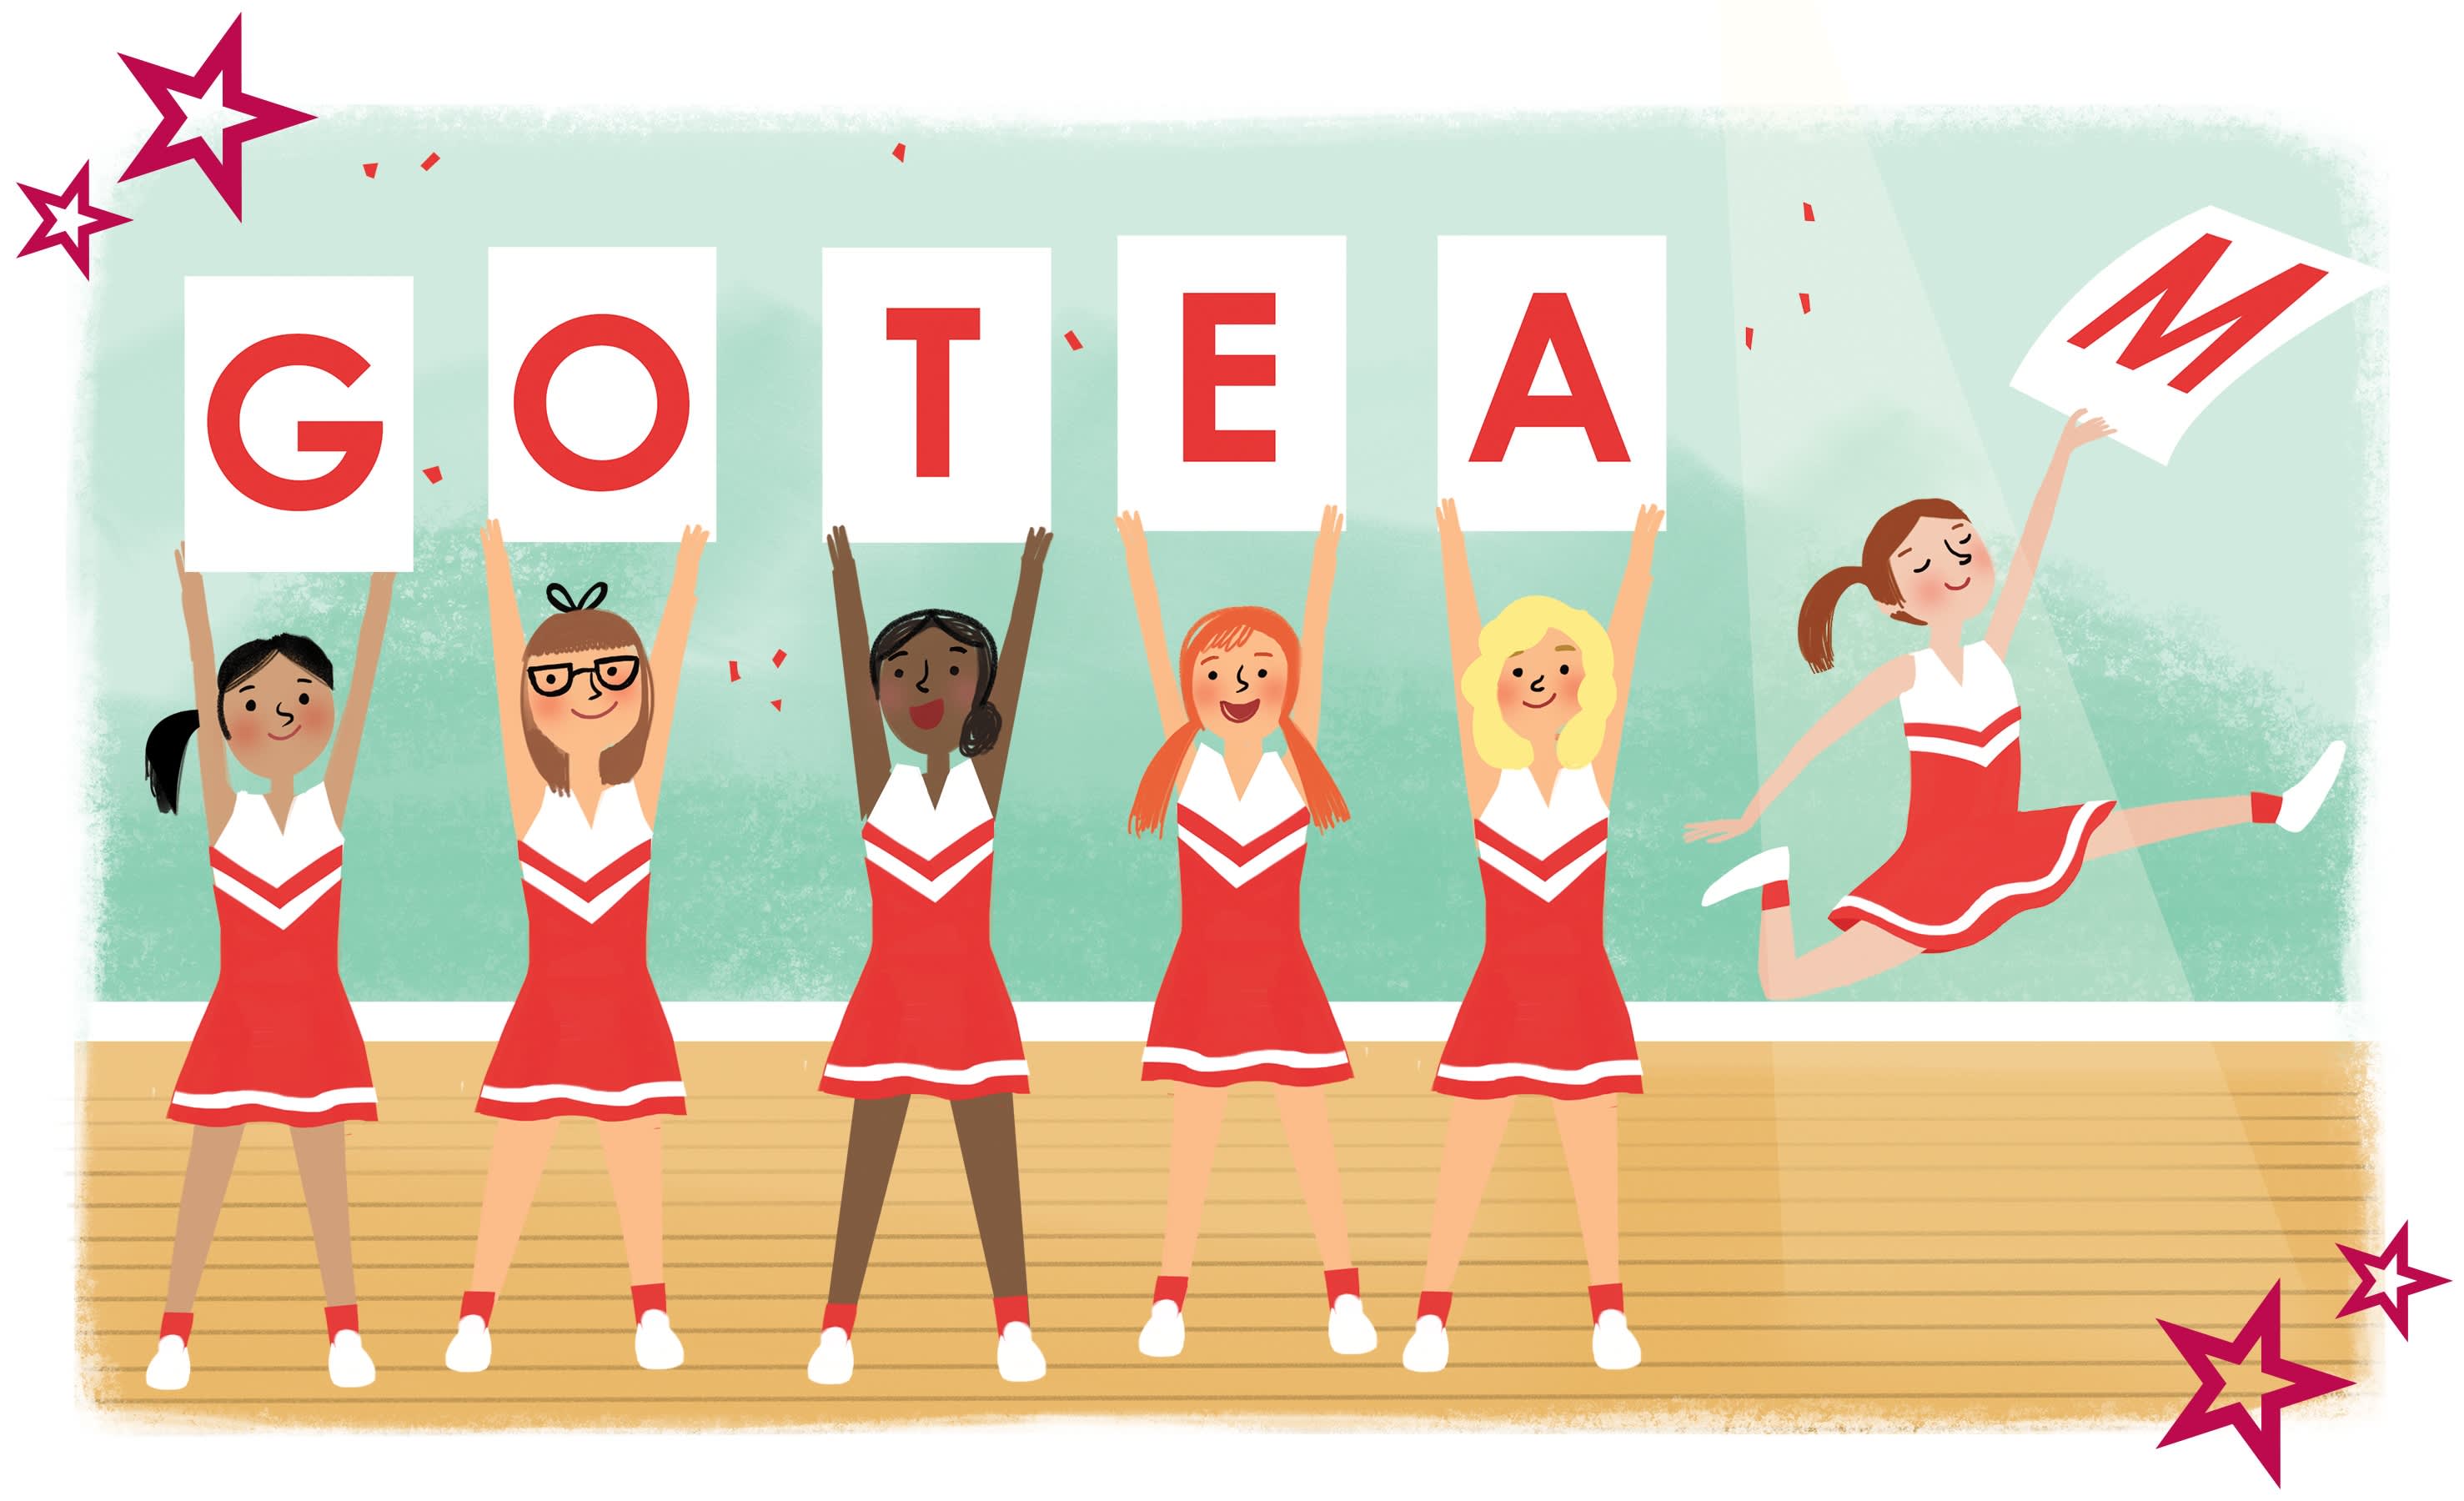 Illustrated cheerleaders holding a Go Team sign